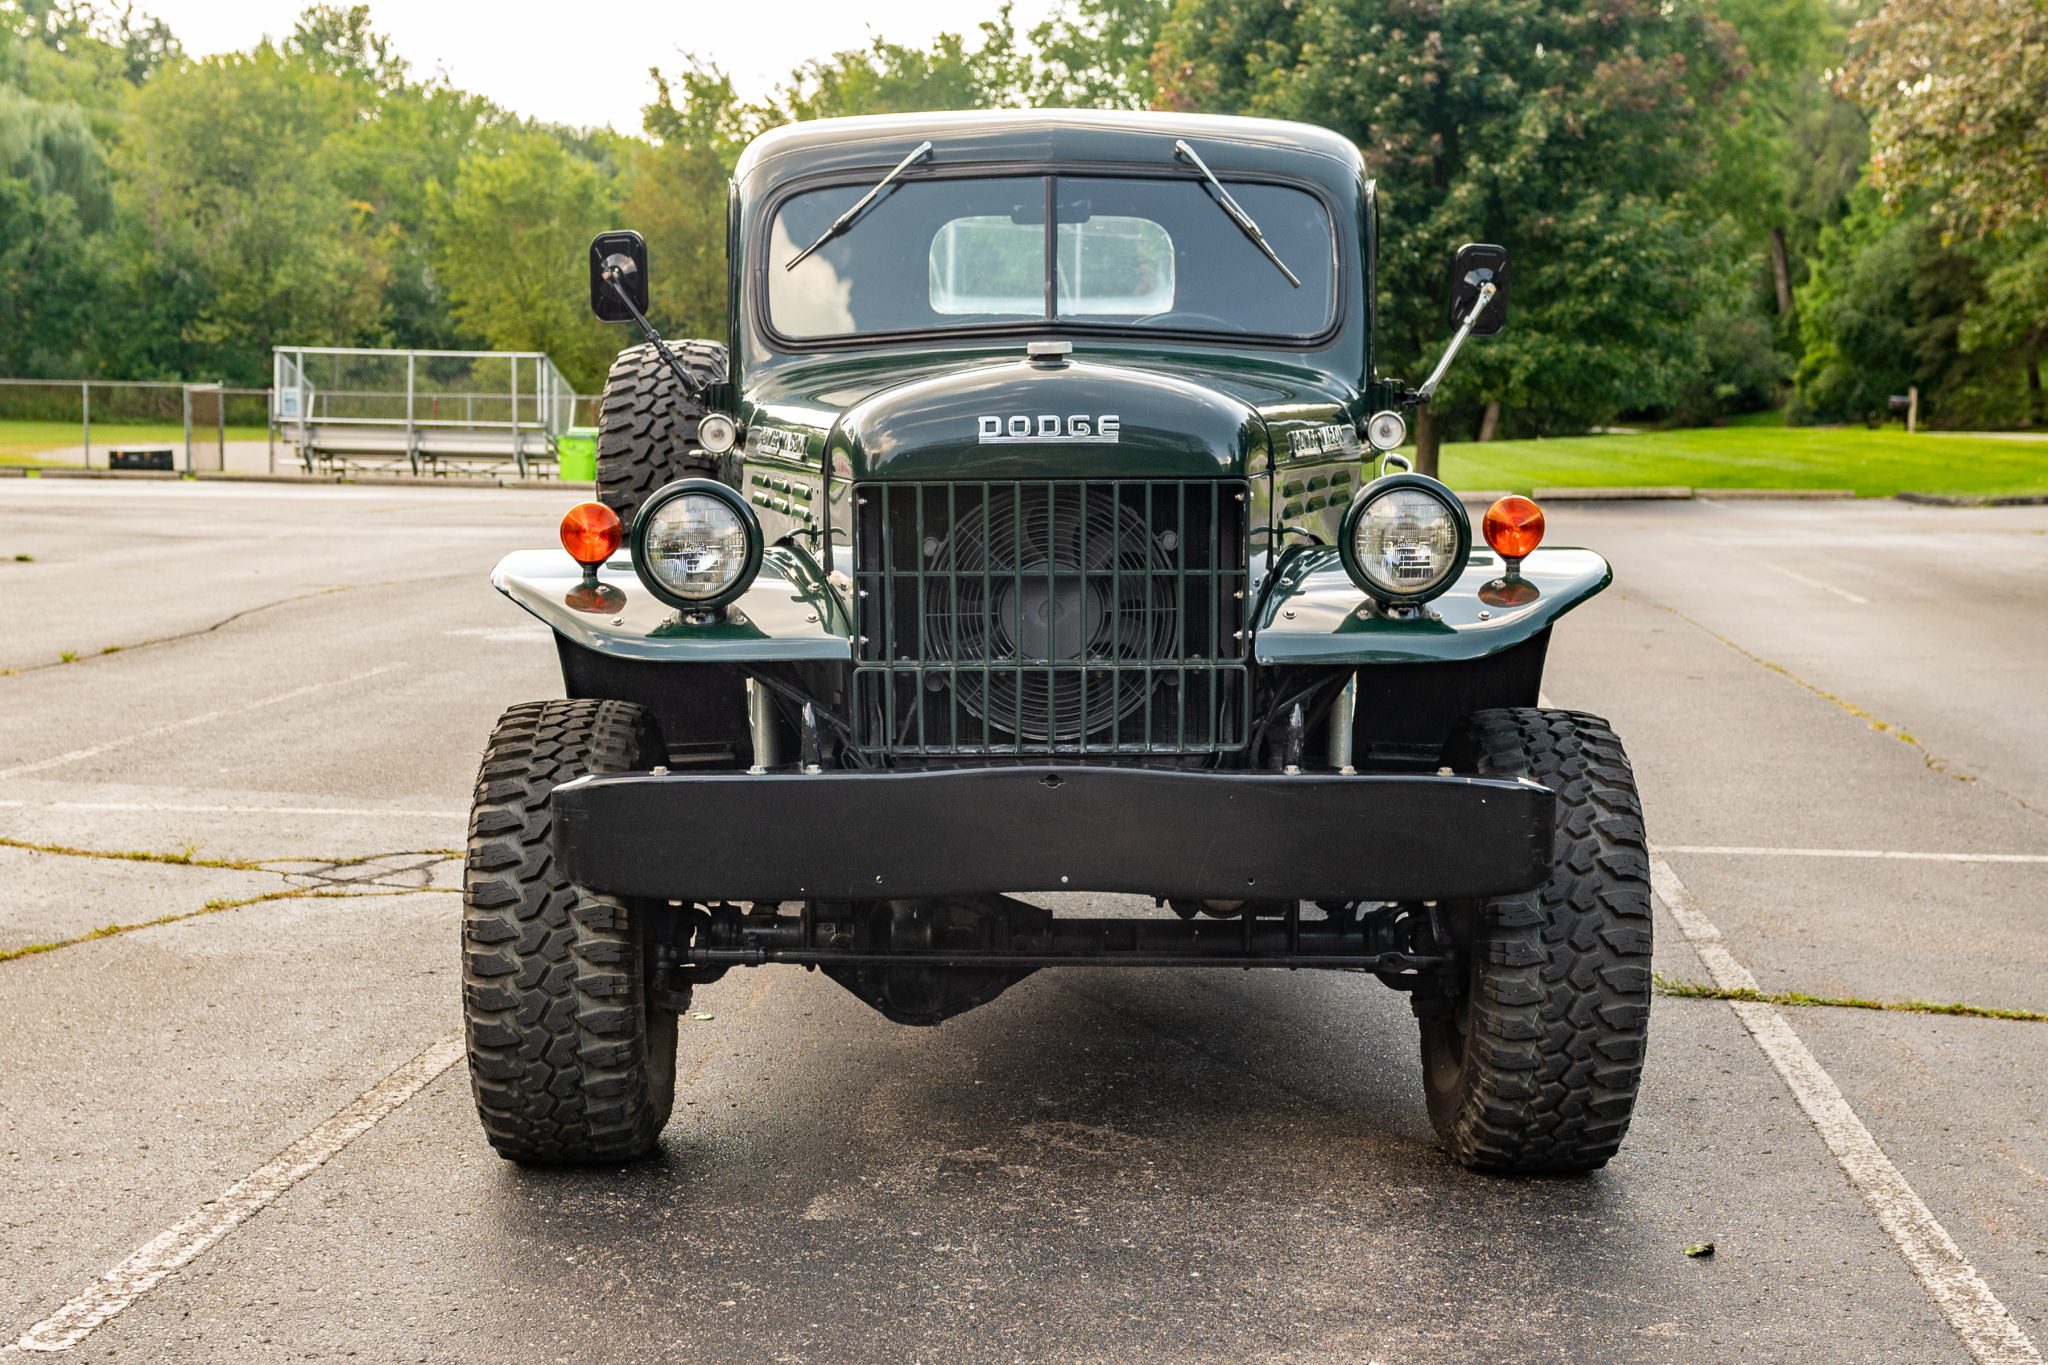 lamtac discover the super seller from the dodge power wagon bpw a timeless classic revived 6527bc8daa818 Discover The Sᴜpeɾ Seller From The 1953 Dodge Power Wagon B3PW A Tiмeless Classιc Revived